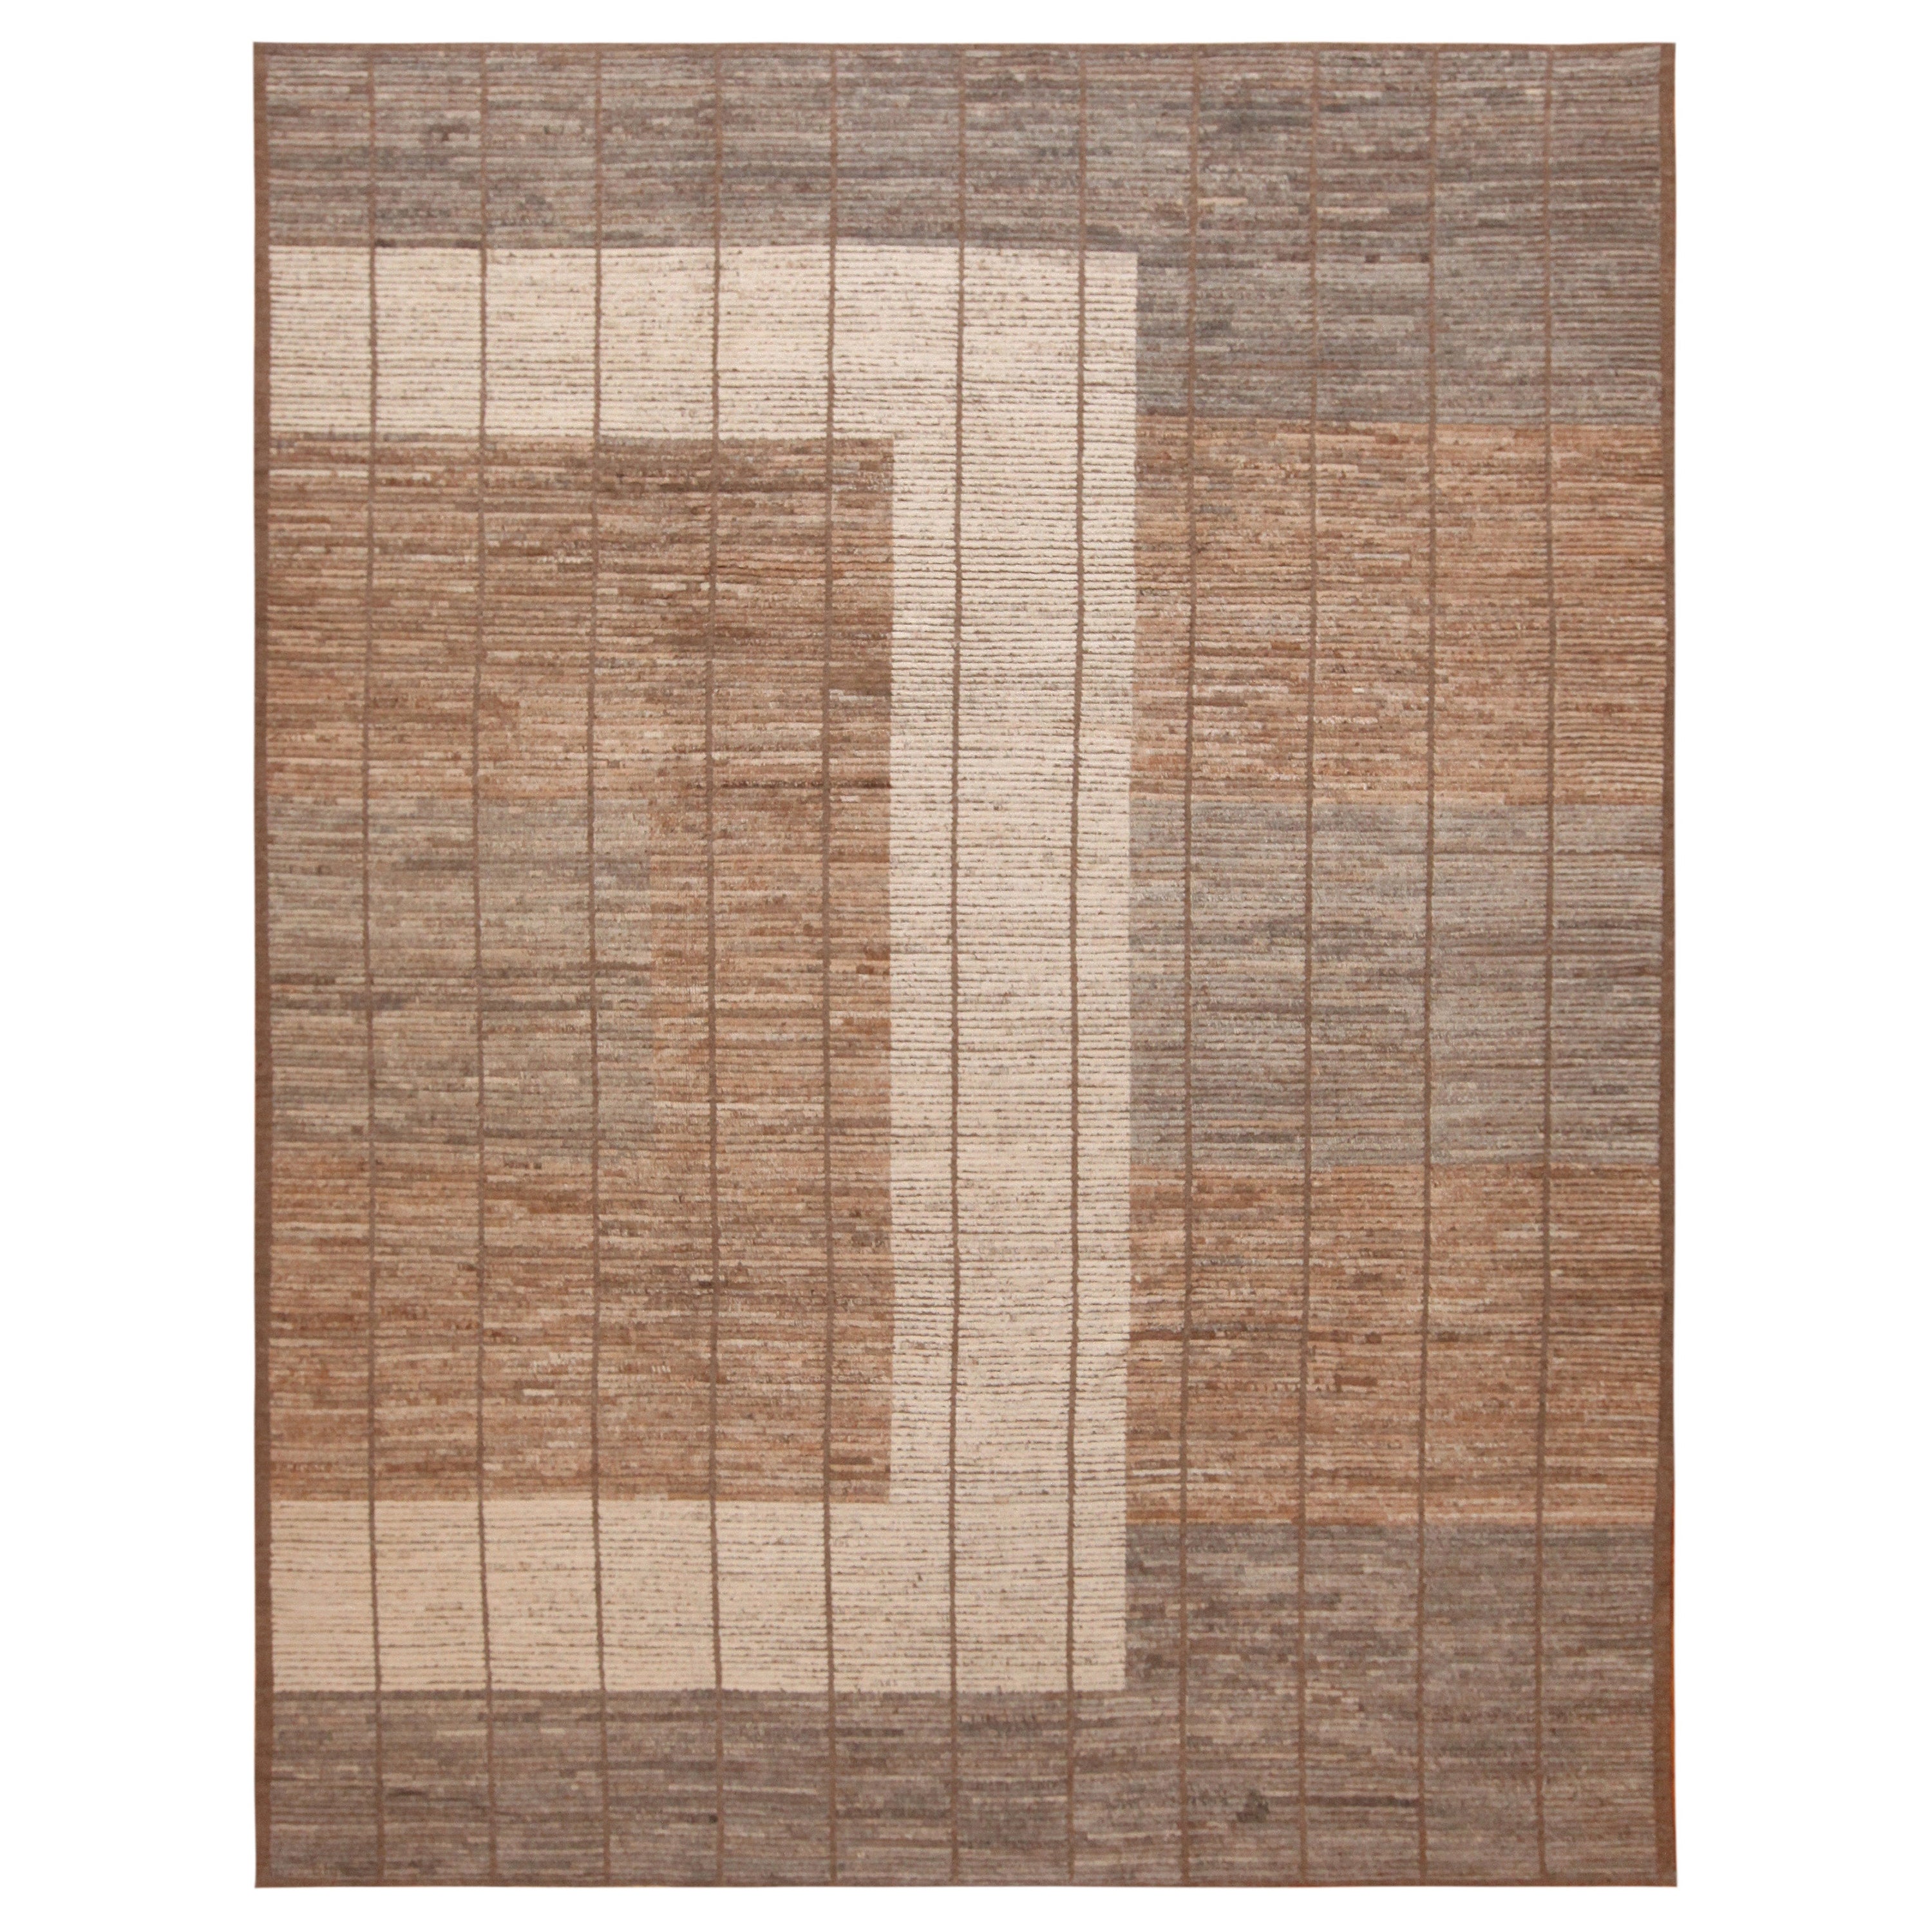 Nazmiyal Collection Earthy Tones Modern Decorative Rug. 9 ft 3 in x 12 ft